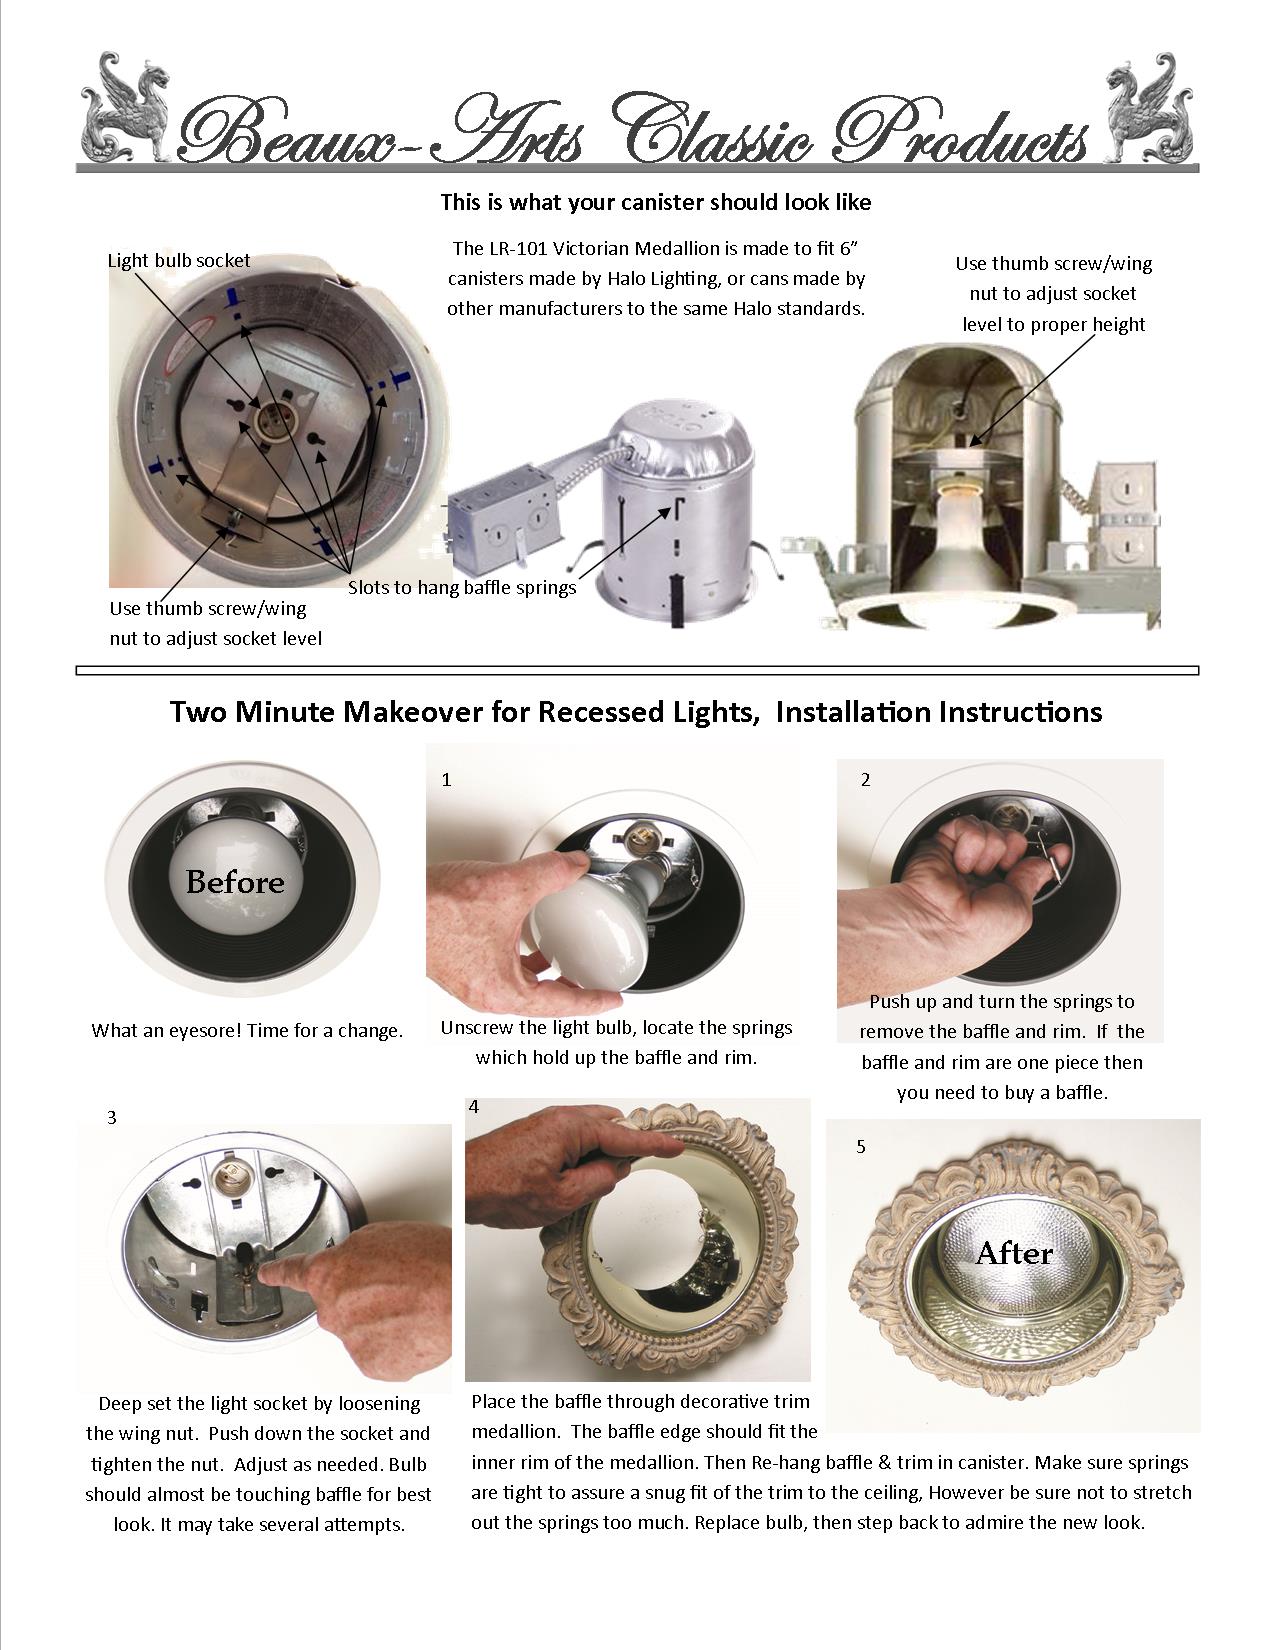 recessed light canister information